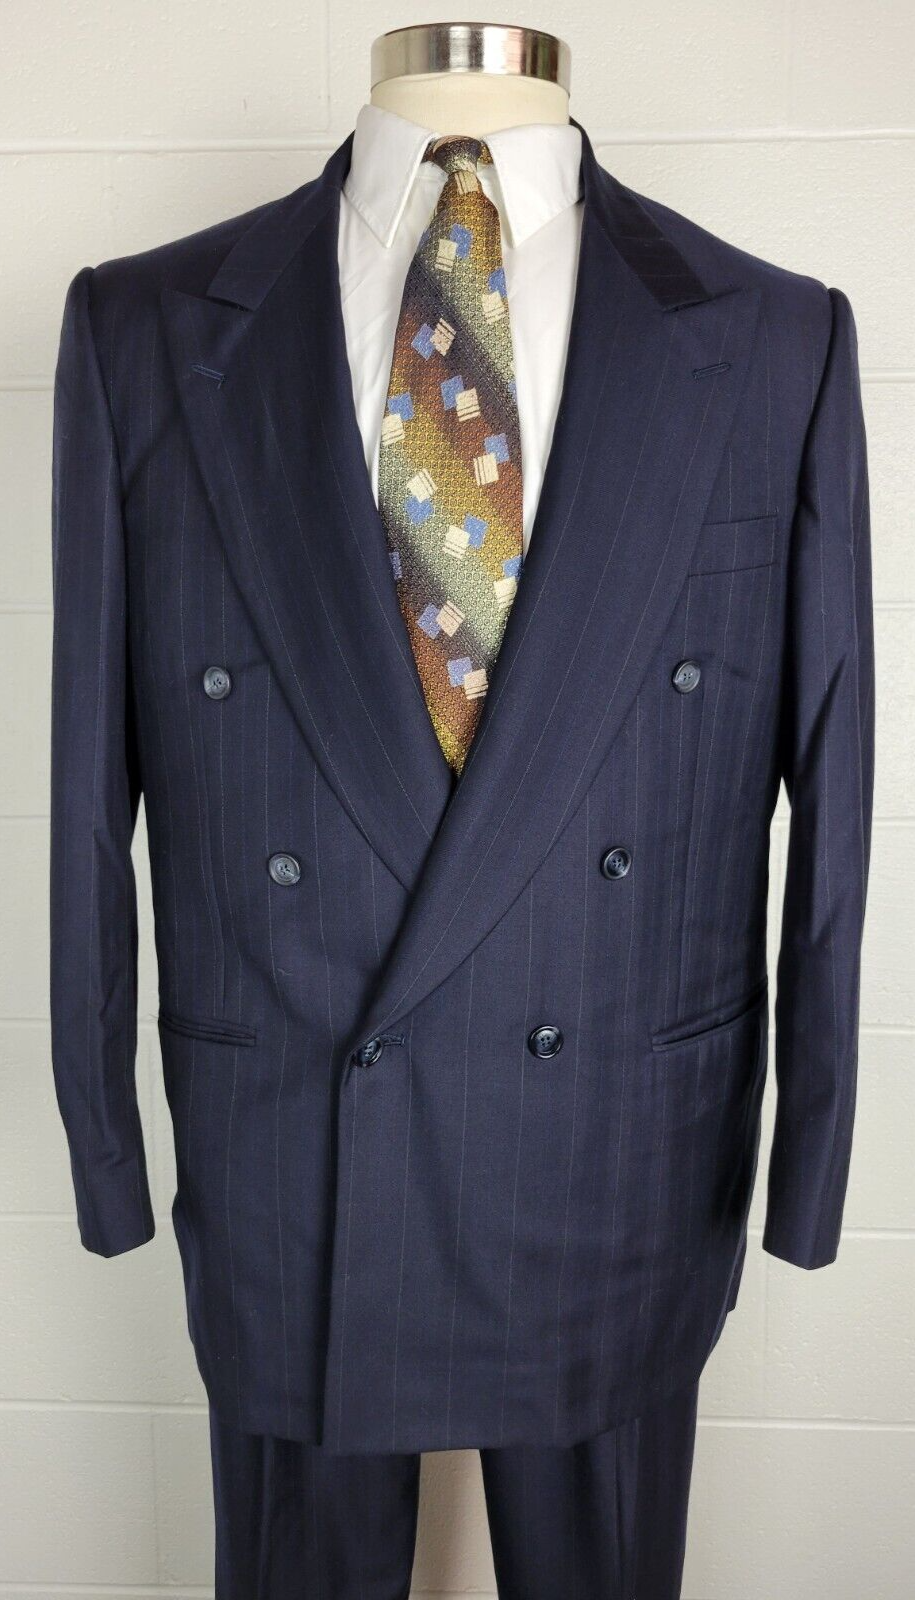 Primary image for Samuelsohn Tilford Mens Double Breasted Blue Pinstripe Wool Suit 43R